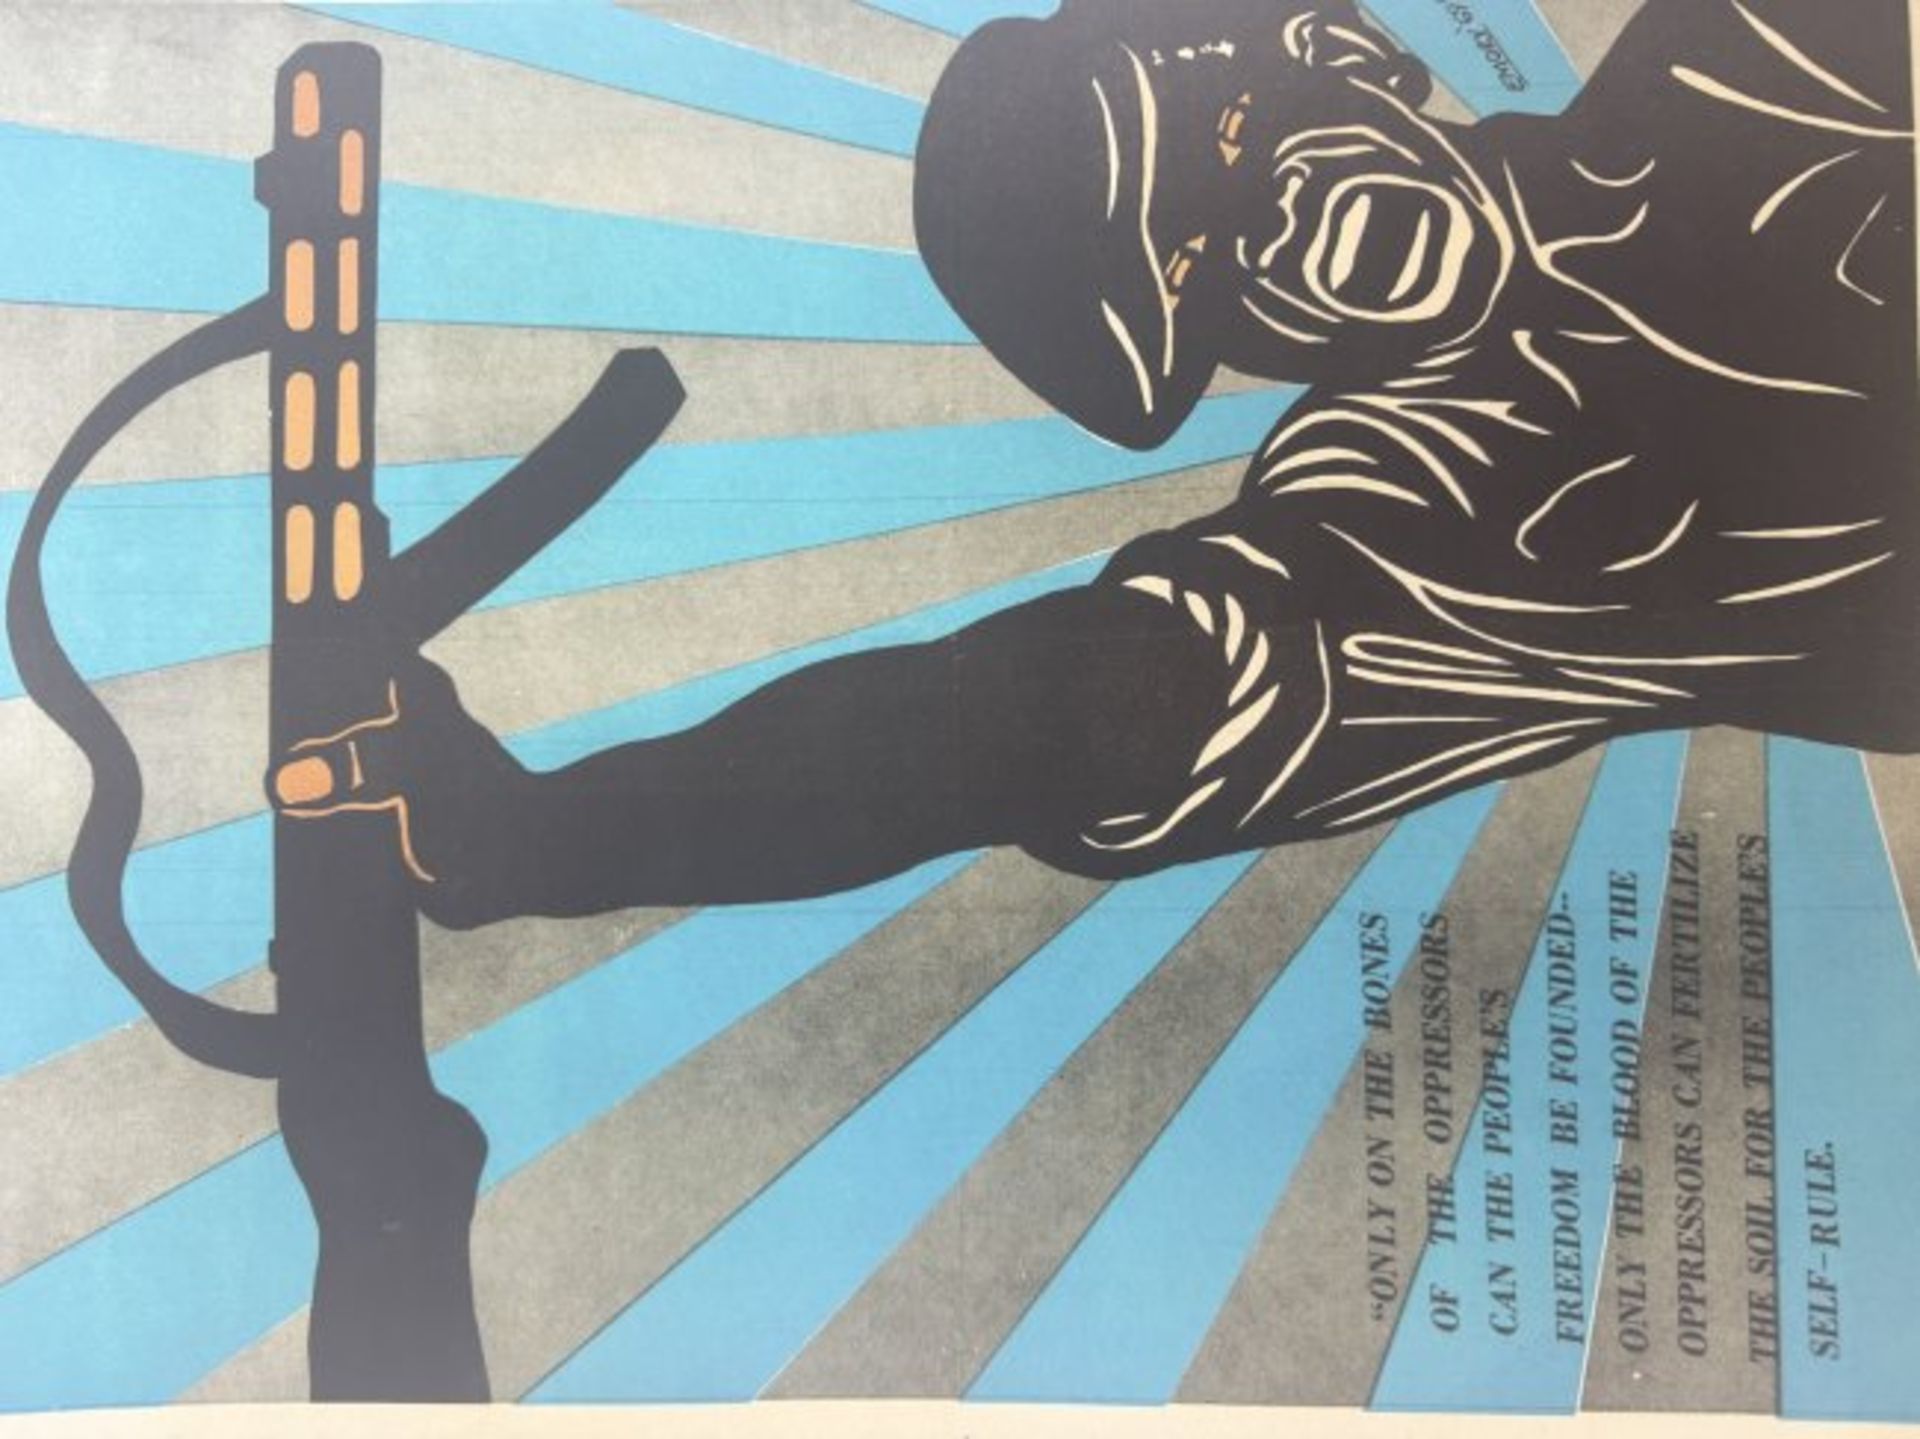 Black Panthers Emory Poster "ONLY ON THE BONES" - Image 2 of 6